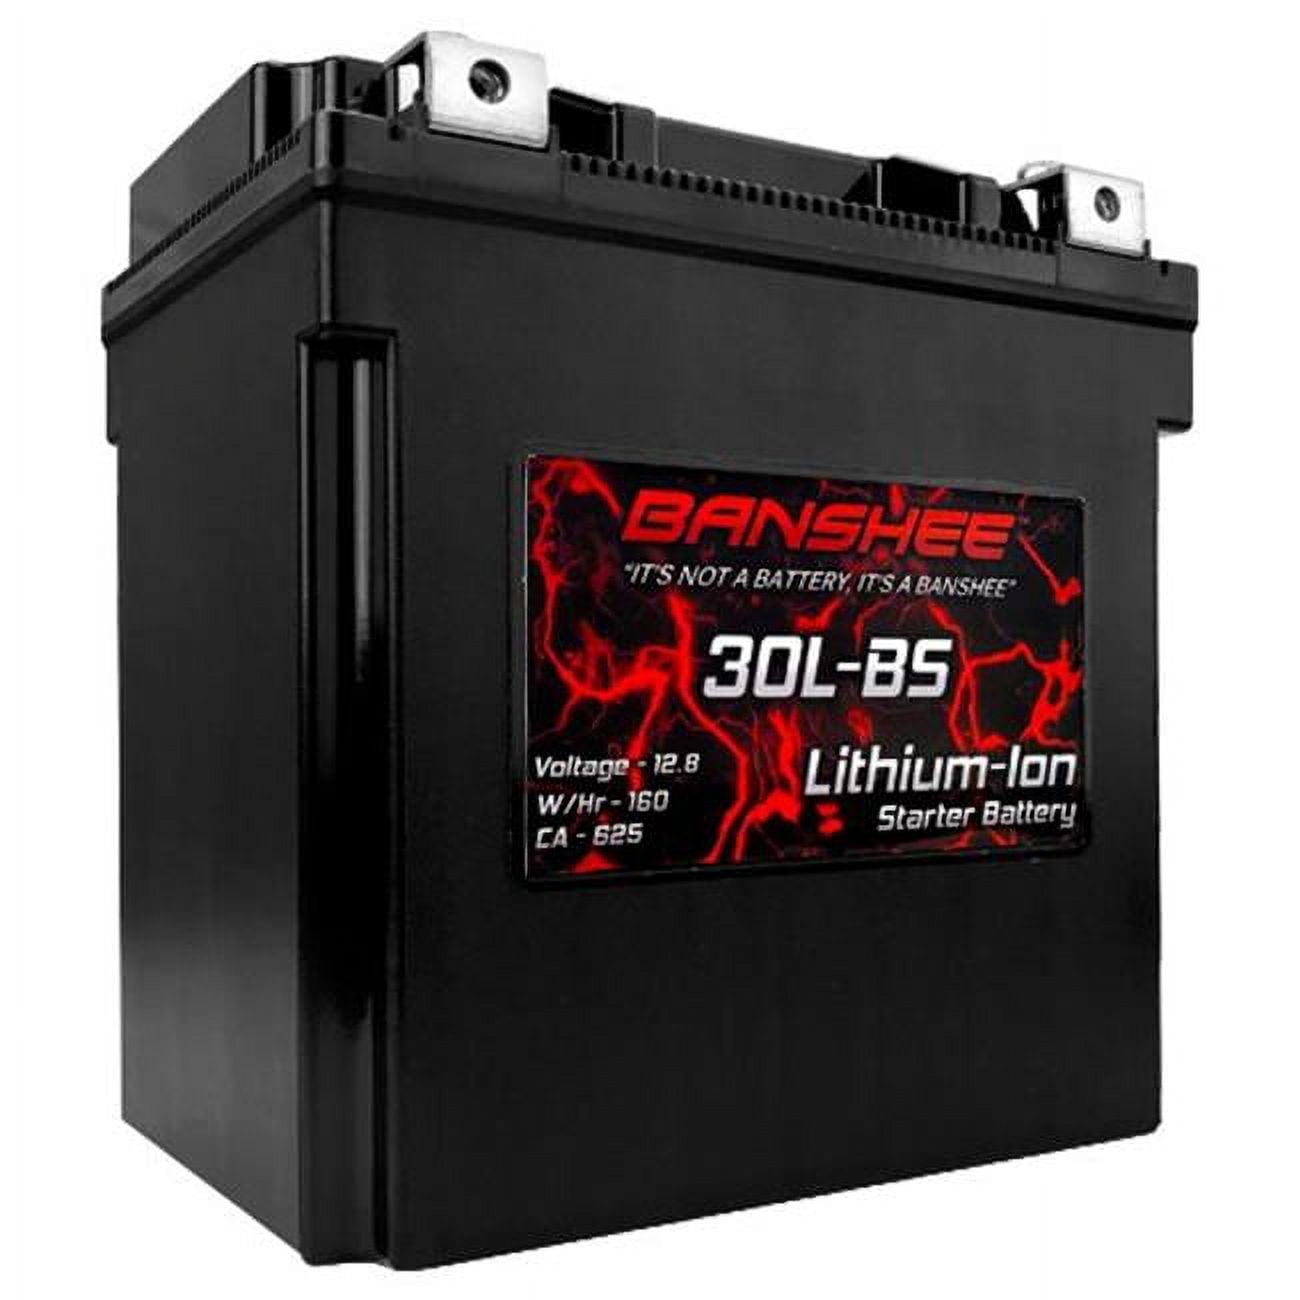 Picture of Banshee DLFP30L-BS 12.8V Lithium Ion 30L-BS Sealed Starter Motorcycle Battery